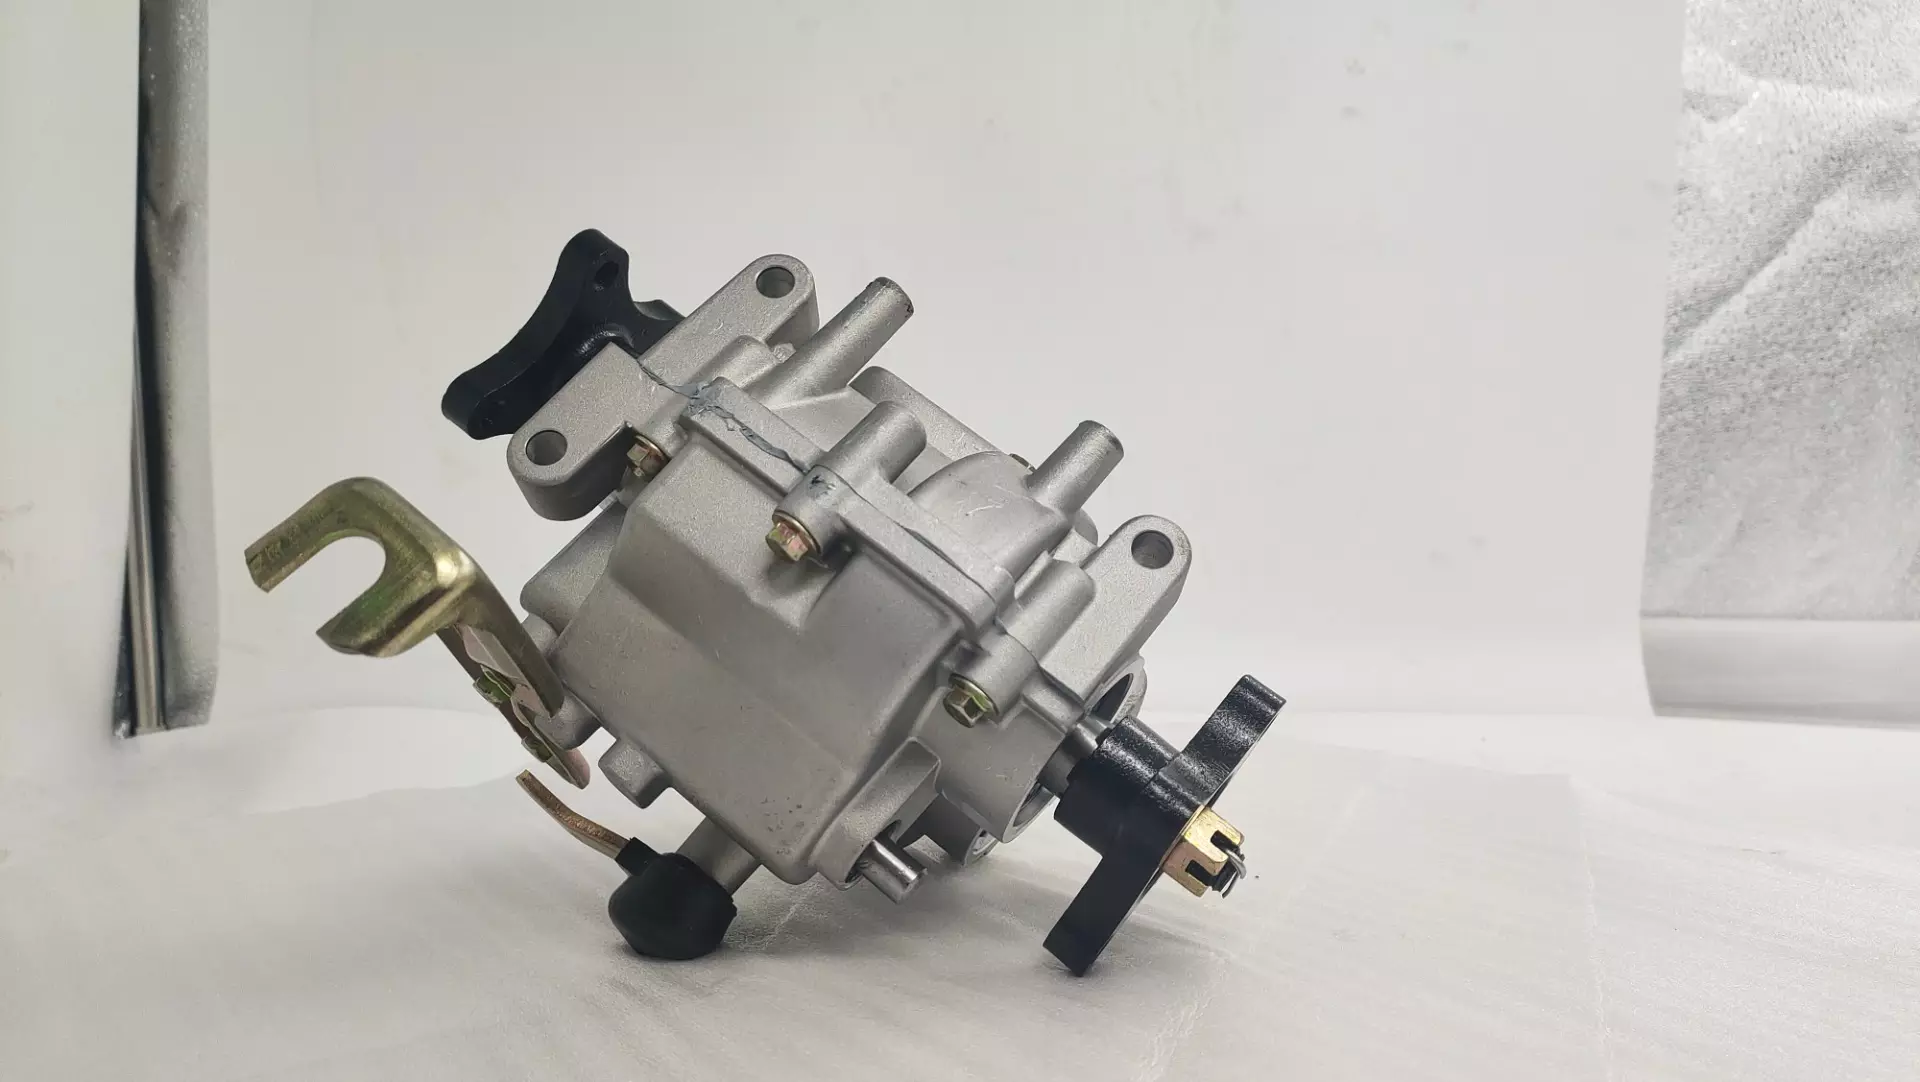 DAYANG High Quality 2-speed  transmission type Aluminum alloy housing  ratio 1.00 1.862 Origin CCC made in China